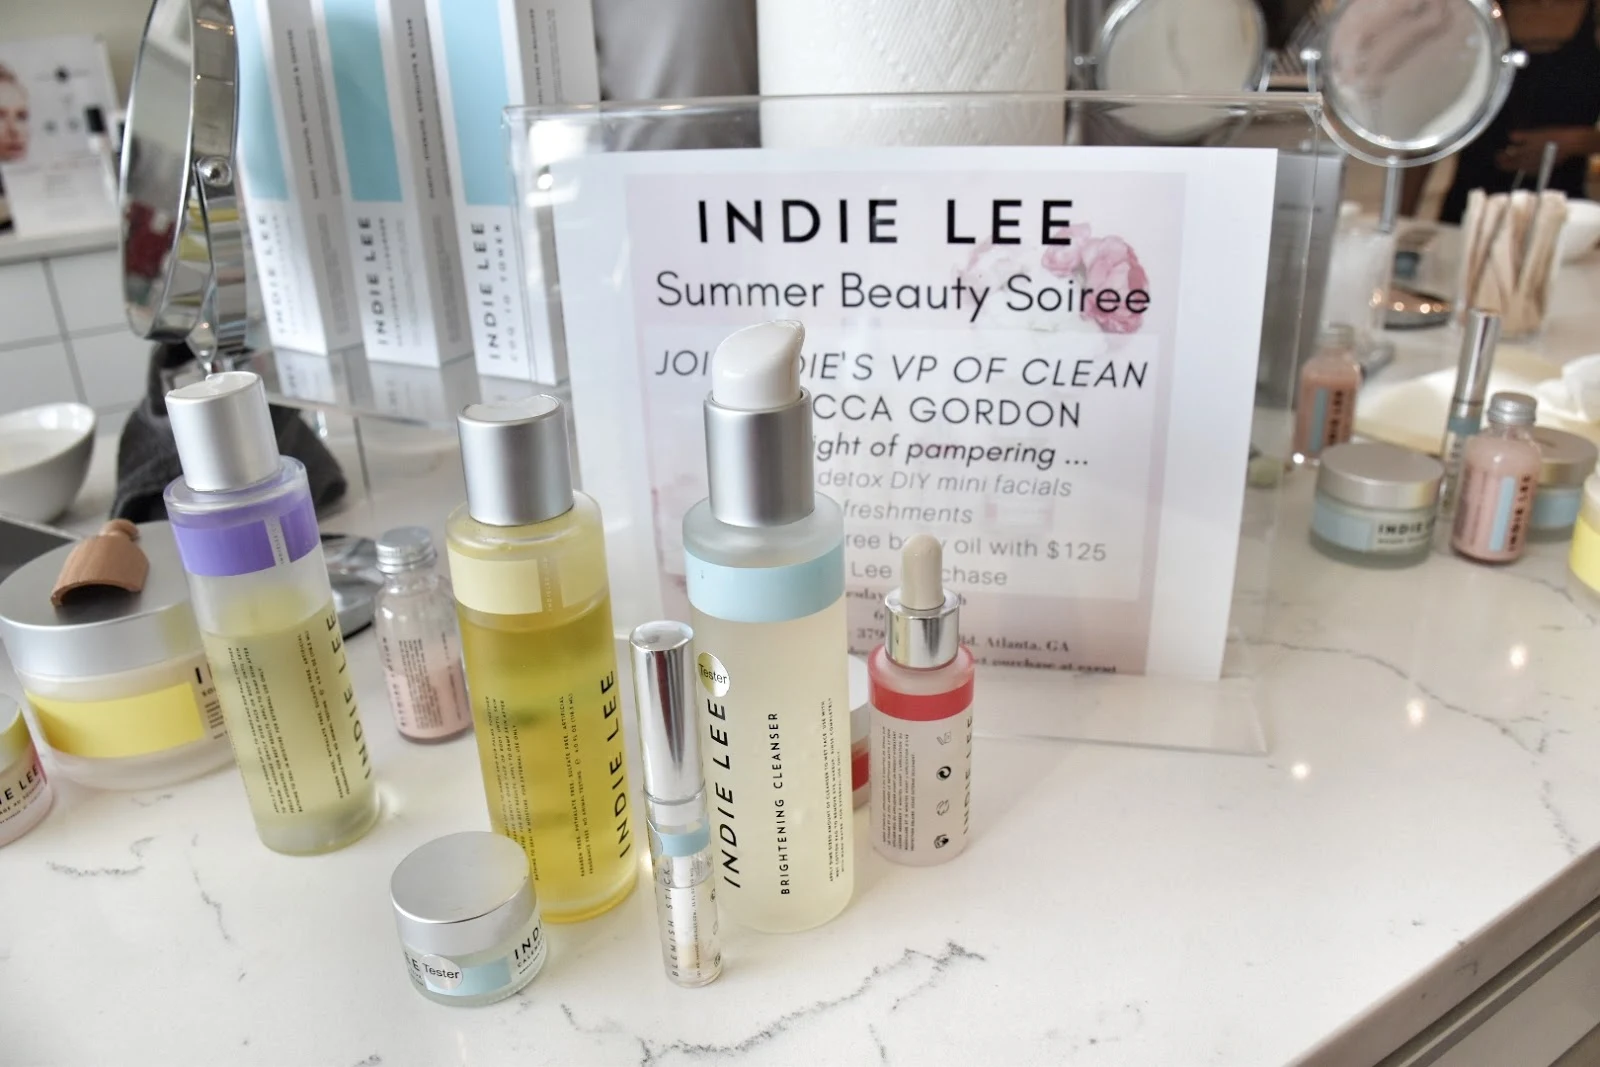 Going Green with Our Beauty Routine with Indie Lee Eco-Chic Beauty Products at AILLEA  via  www.productreviewmom.com